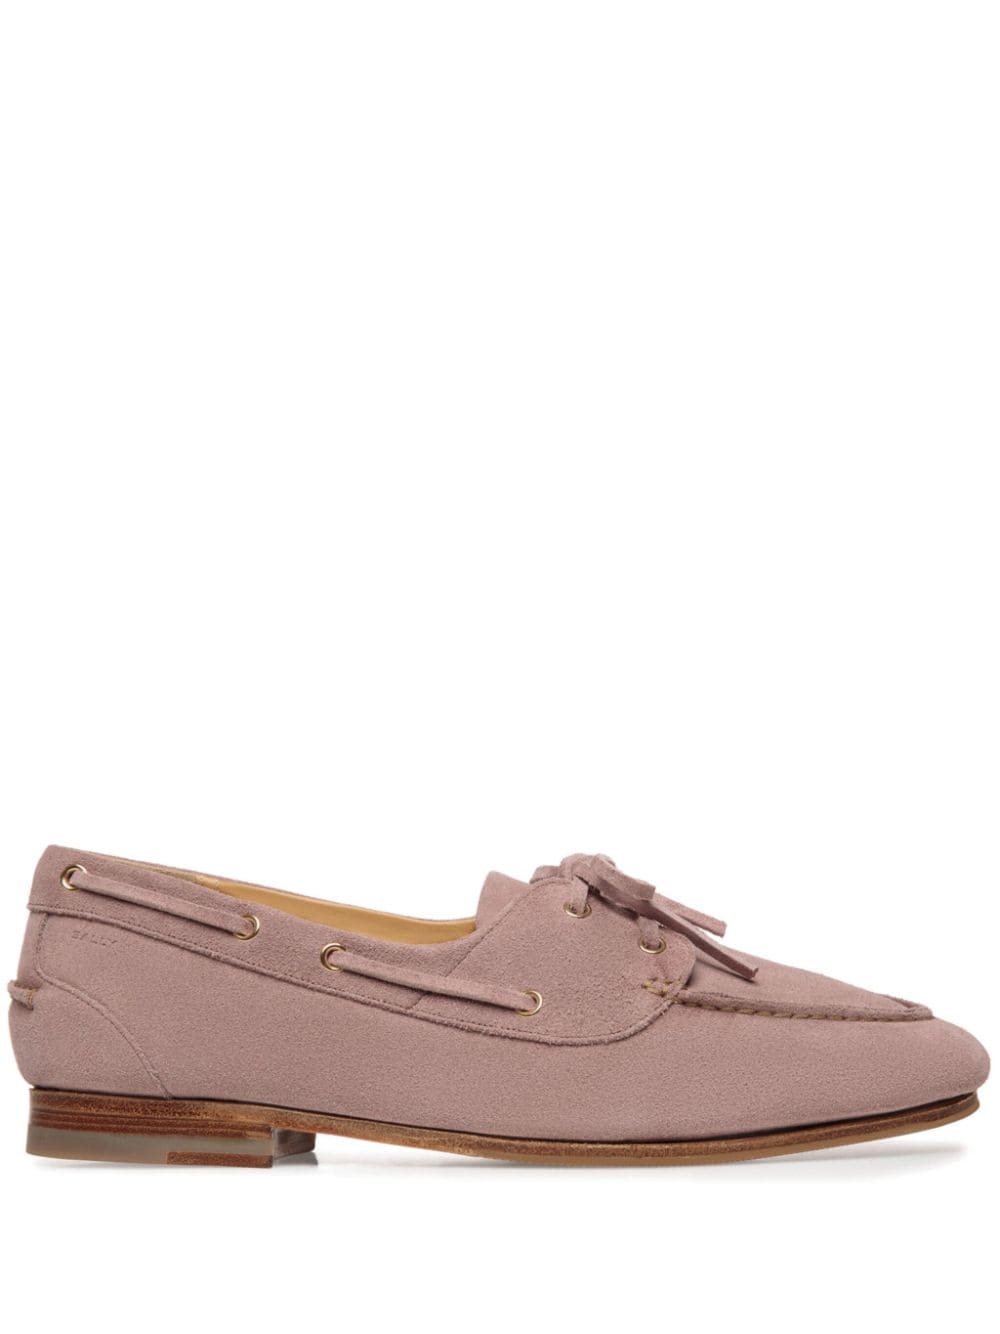 Bally Plume boat shoes - Pink von Bally